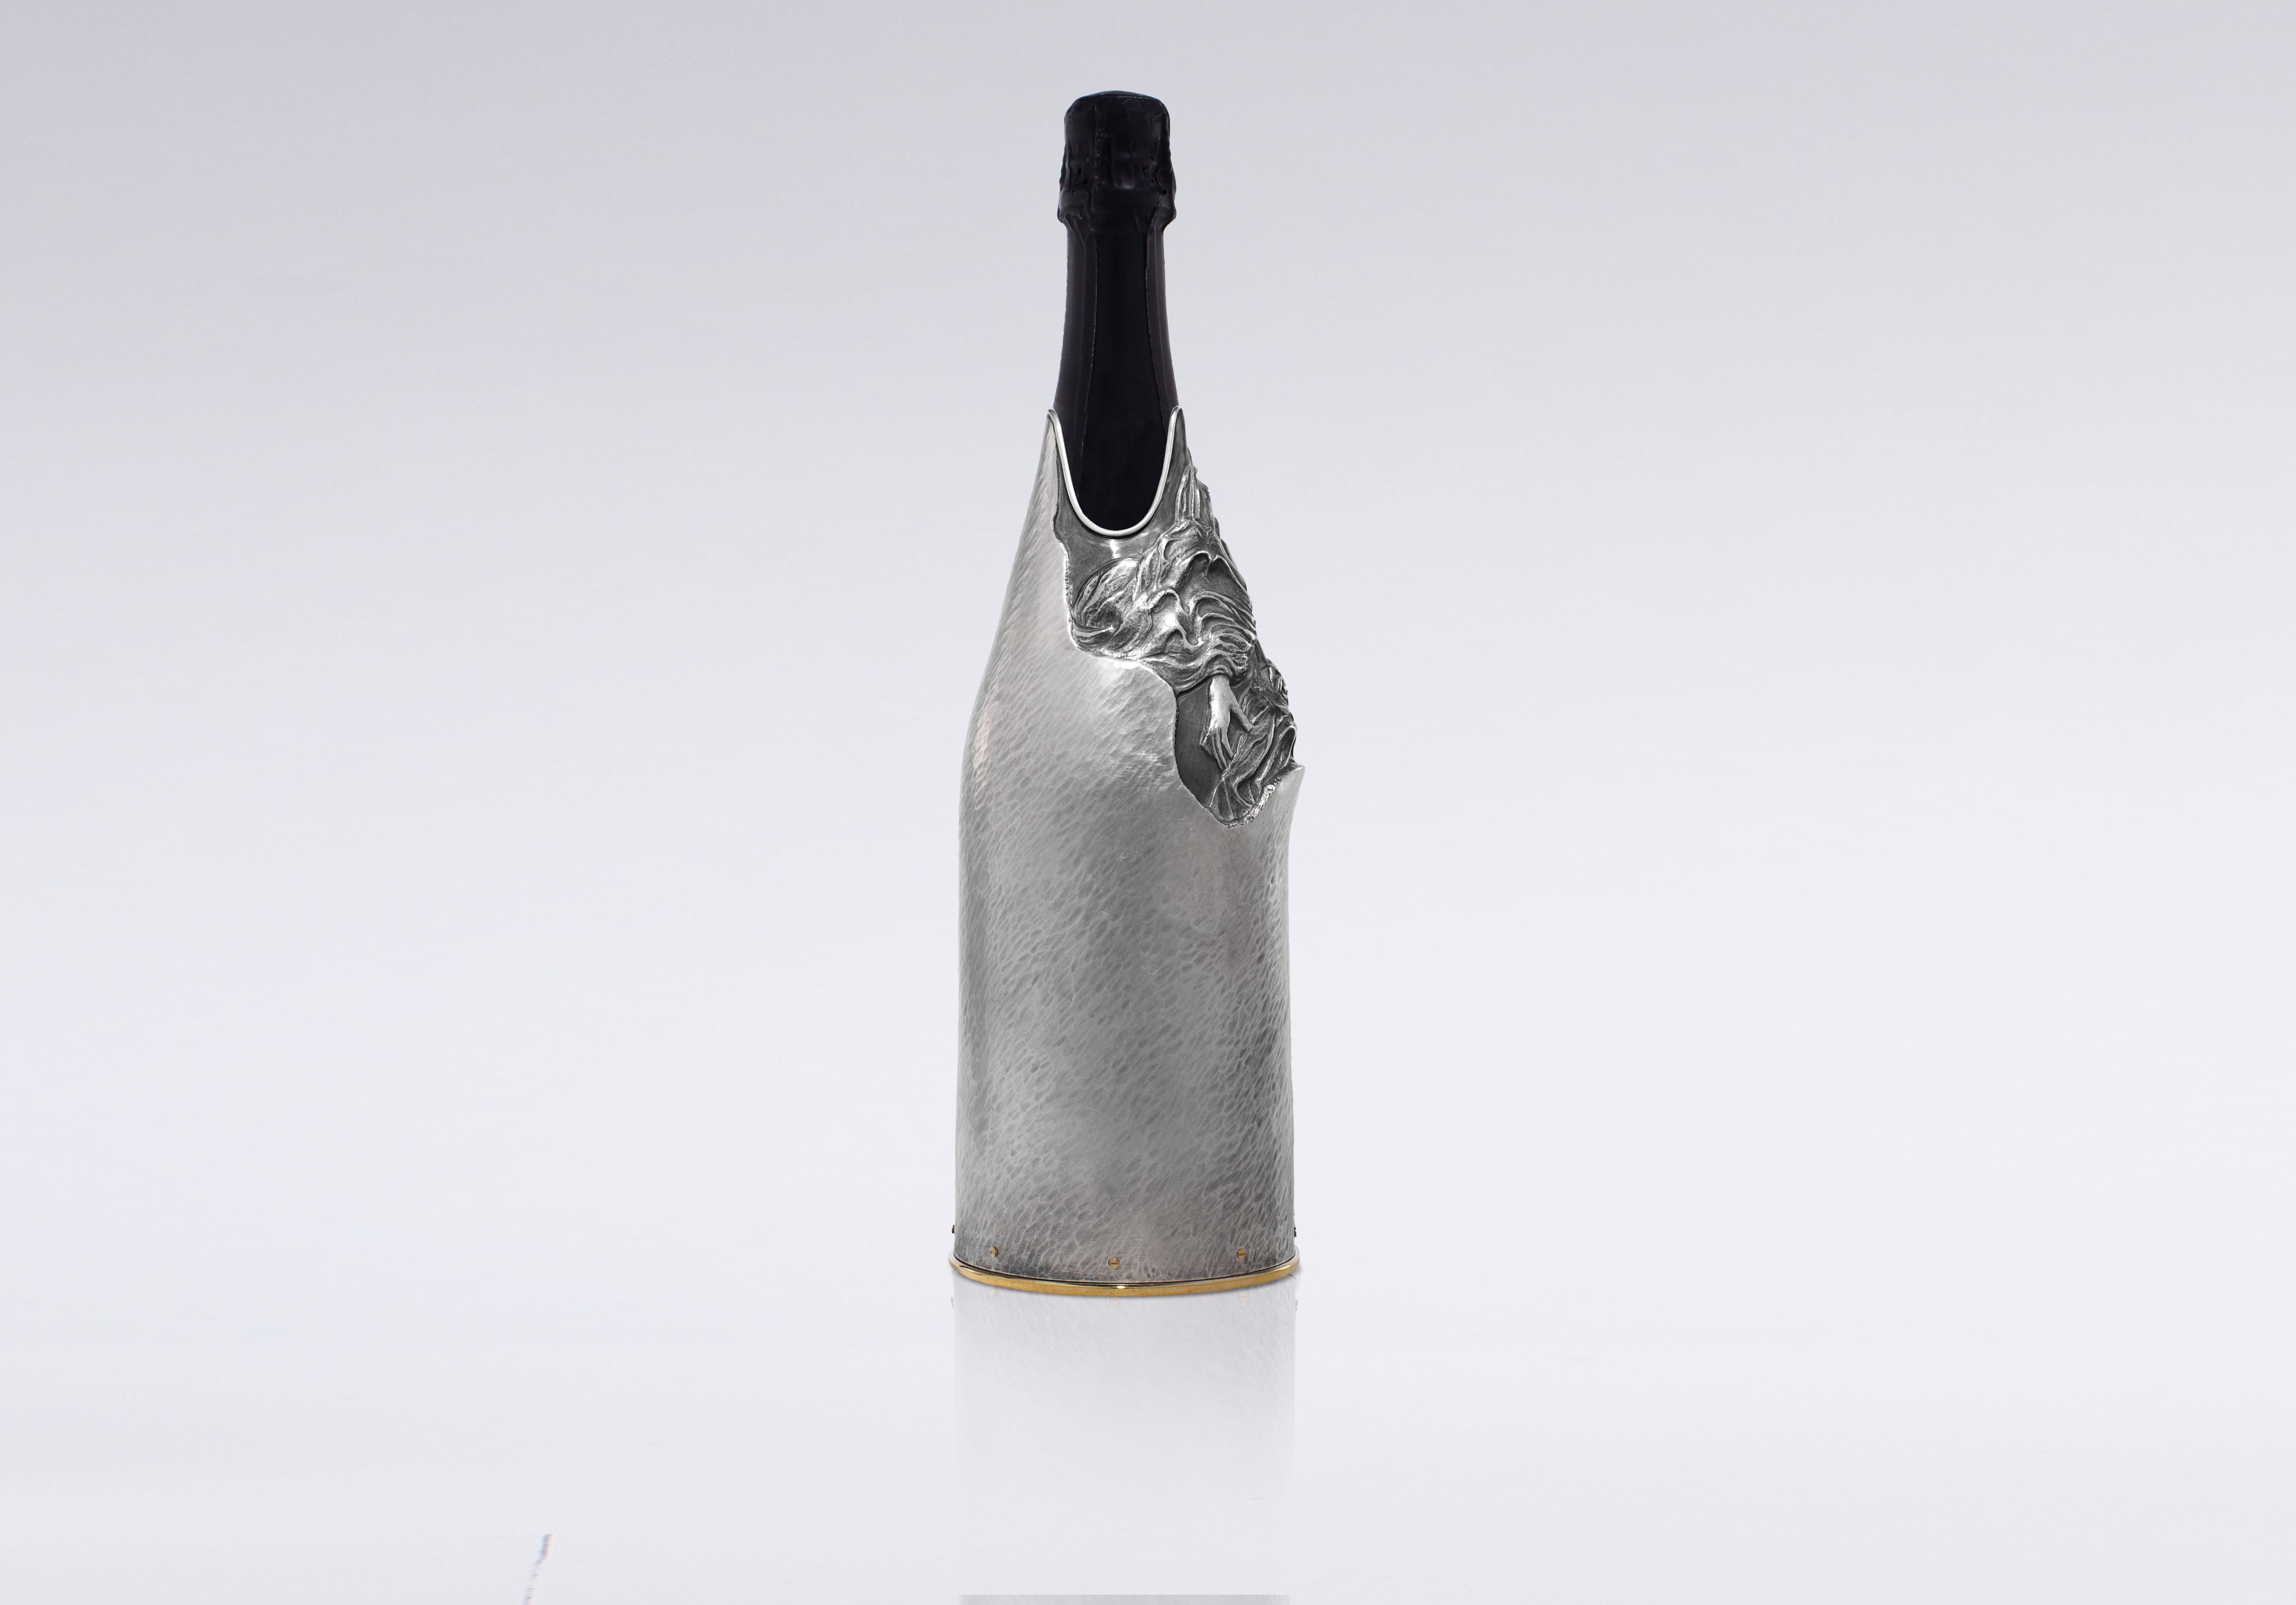 
Explore a unique champagne K-OVER from our Work of Art collection, expertly crafted in pure Silver 999/°° by Stefano Vigni. This distinctive piece, a celebration of his grandson Diego’s birth, blends personal sentiment with superior